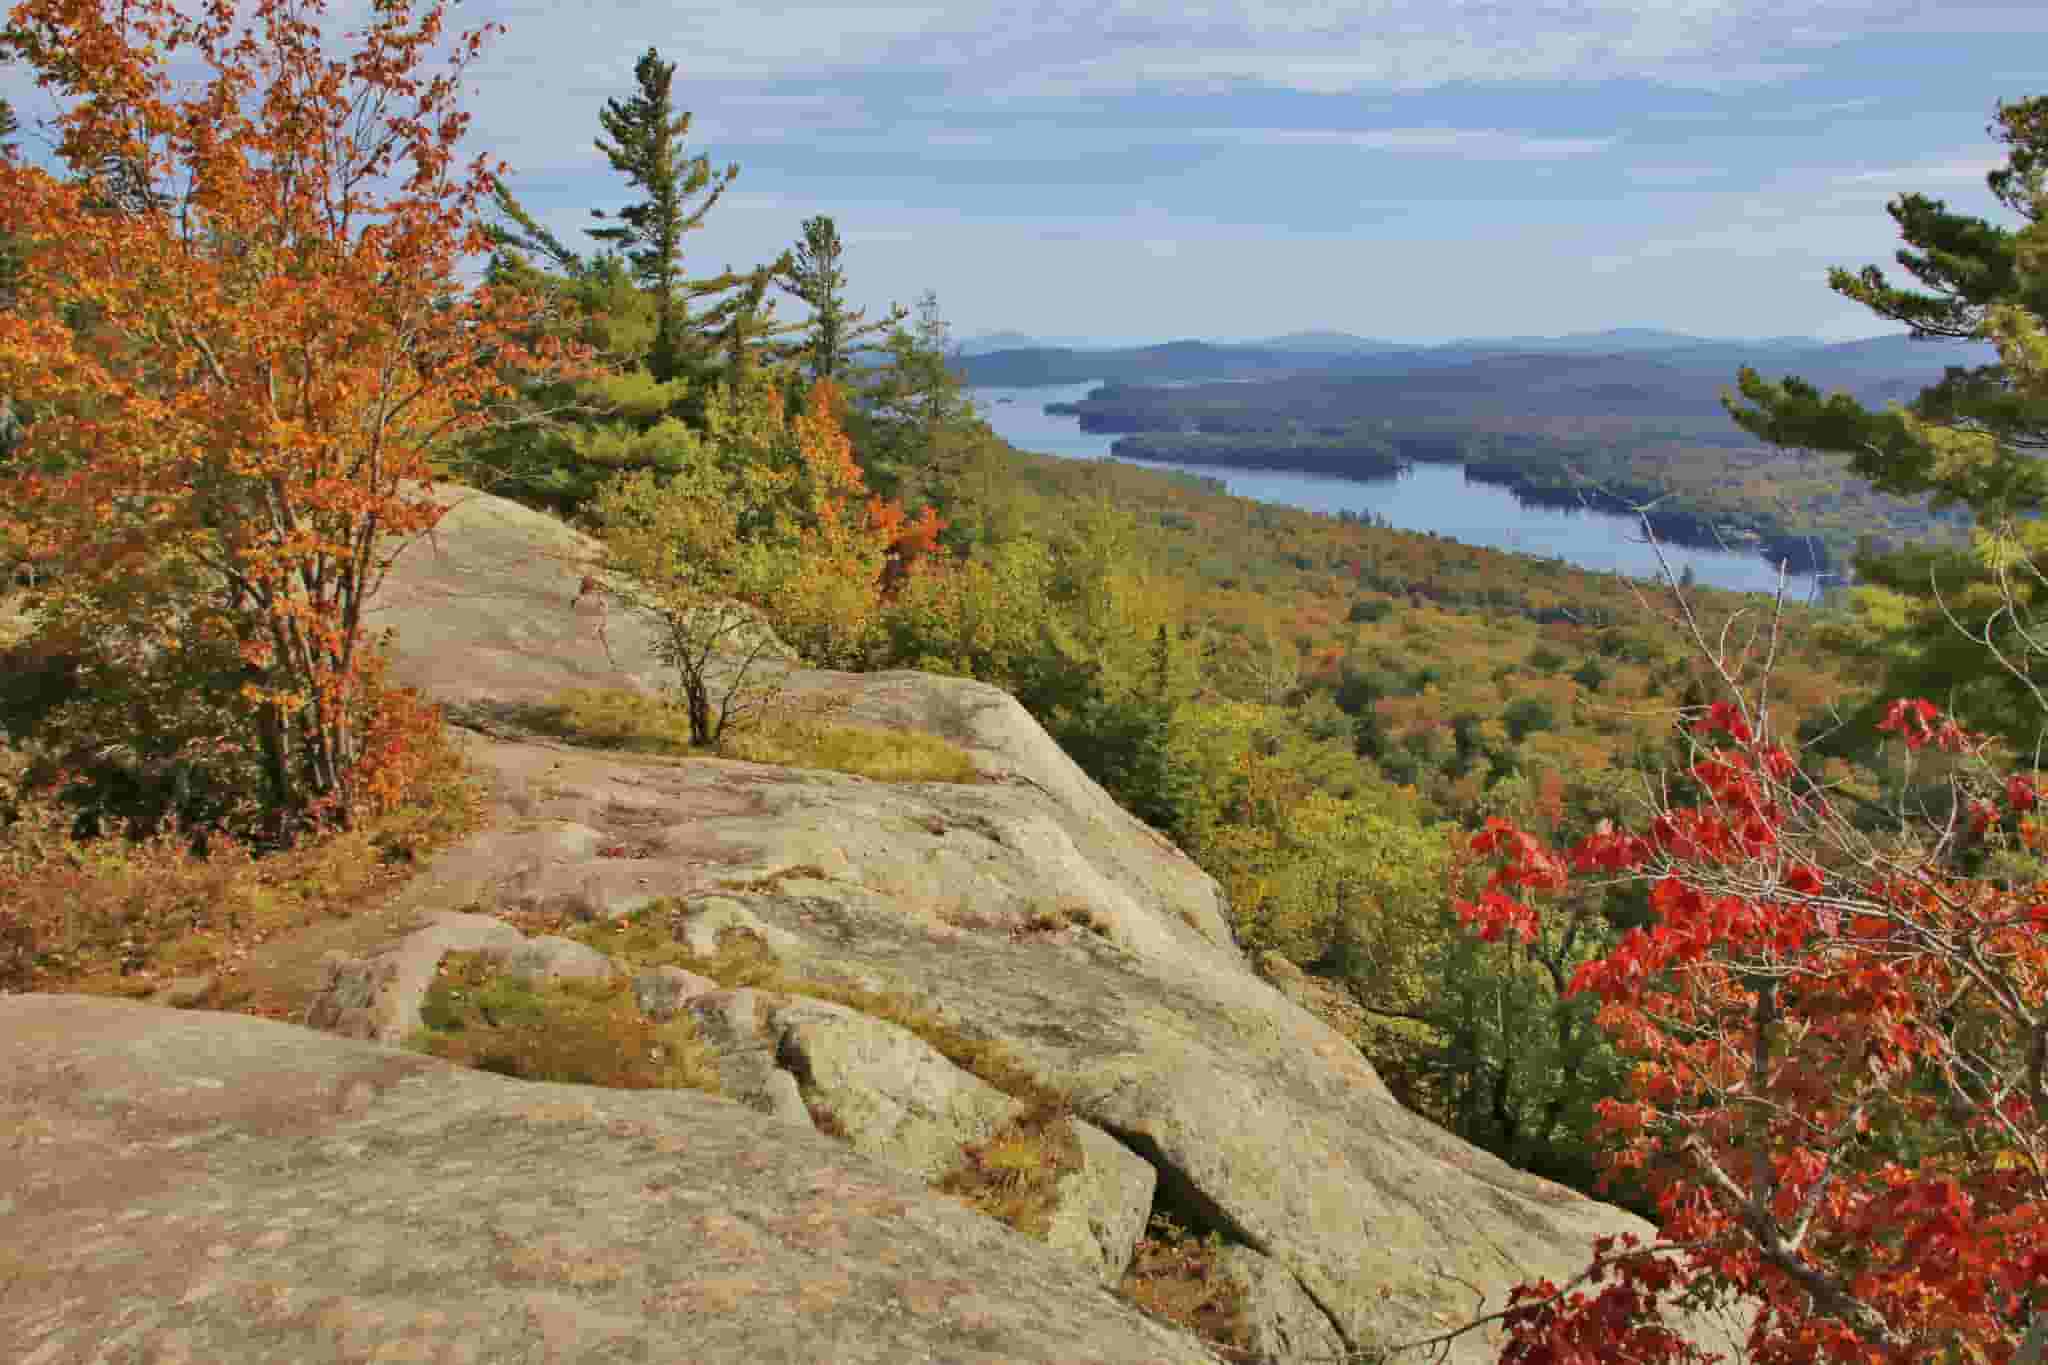 Things to do in Old Forge